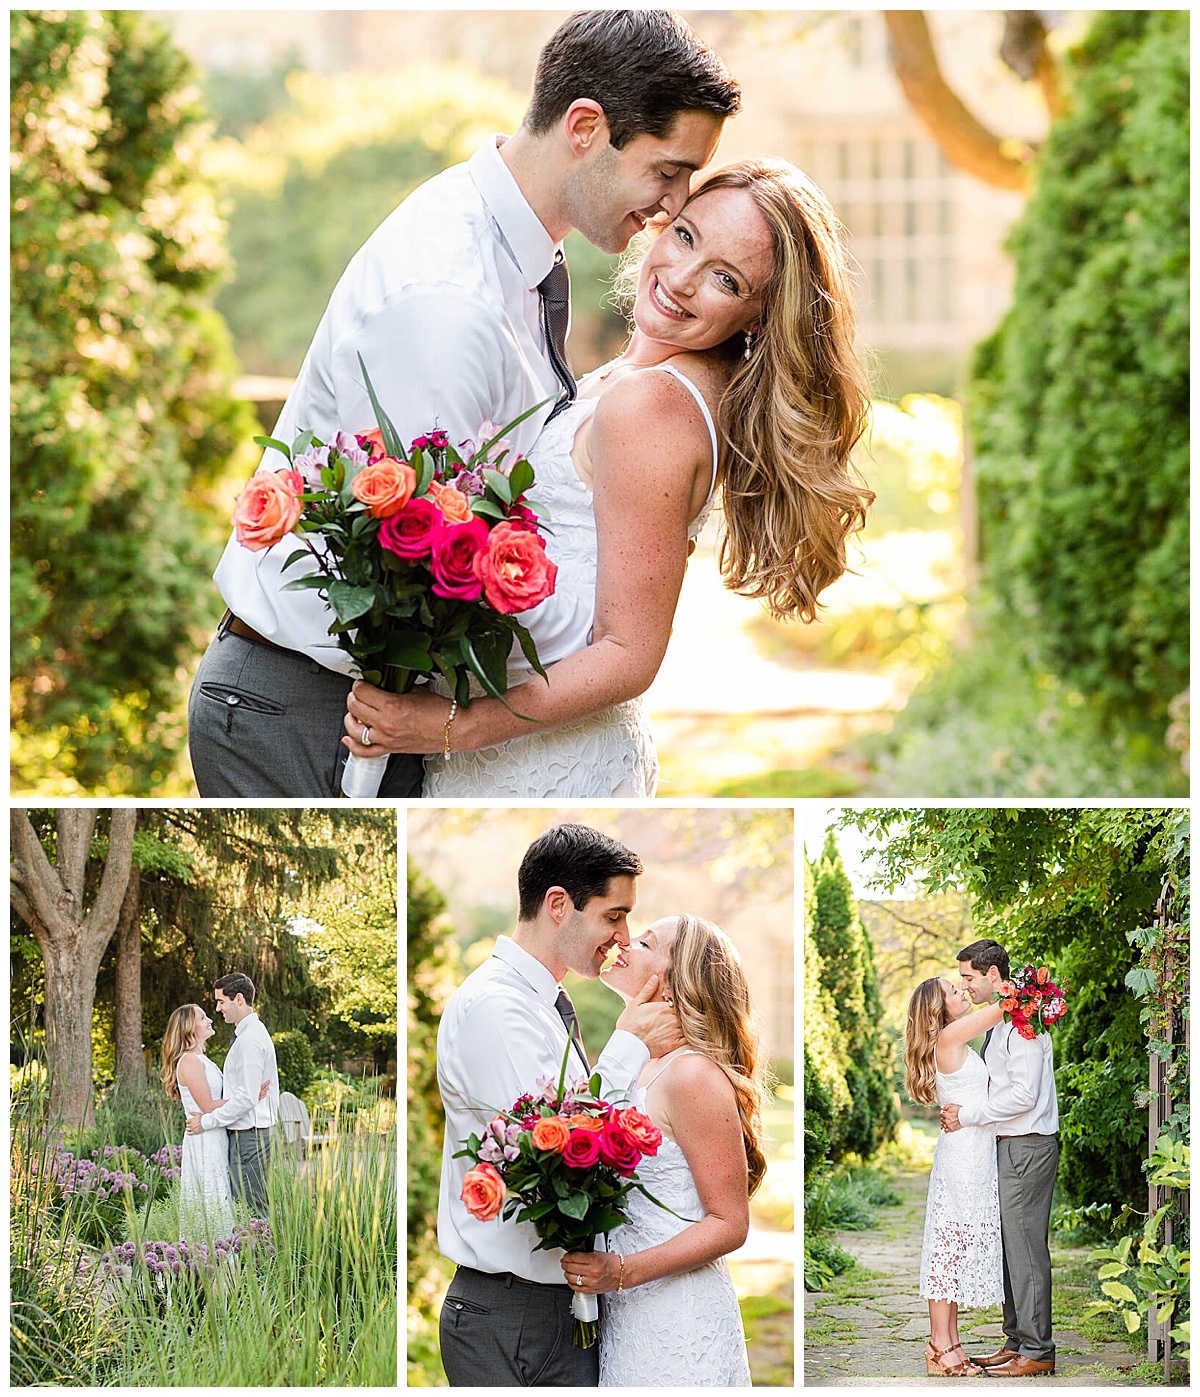 photos featuring a bride and groom at the paine art center wedding venue in oshkosh, wi